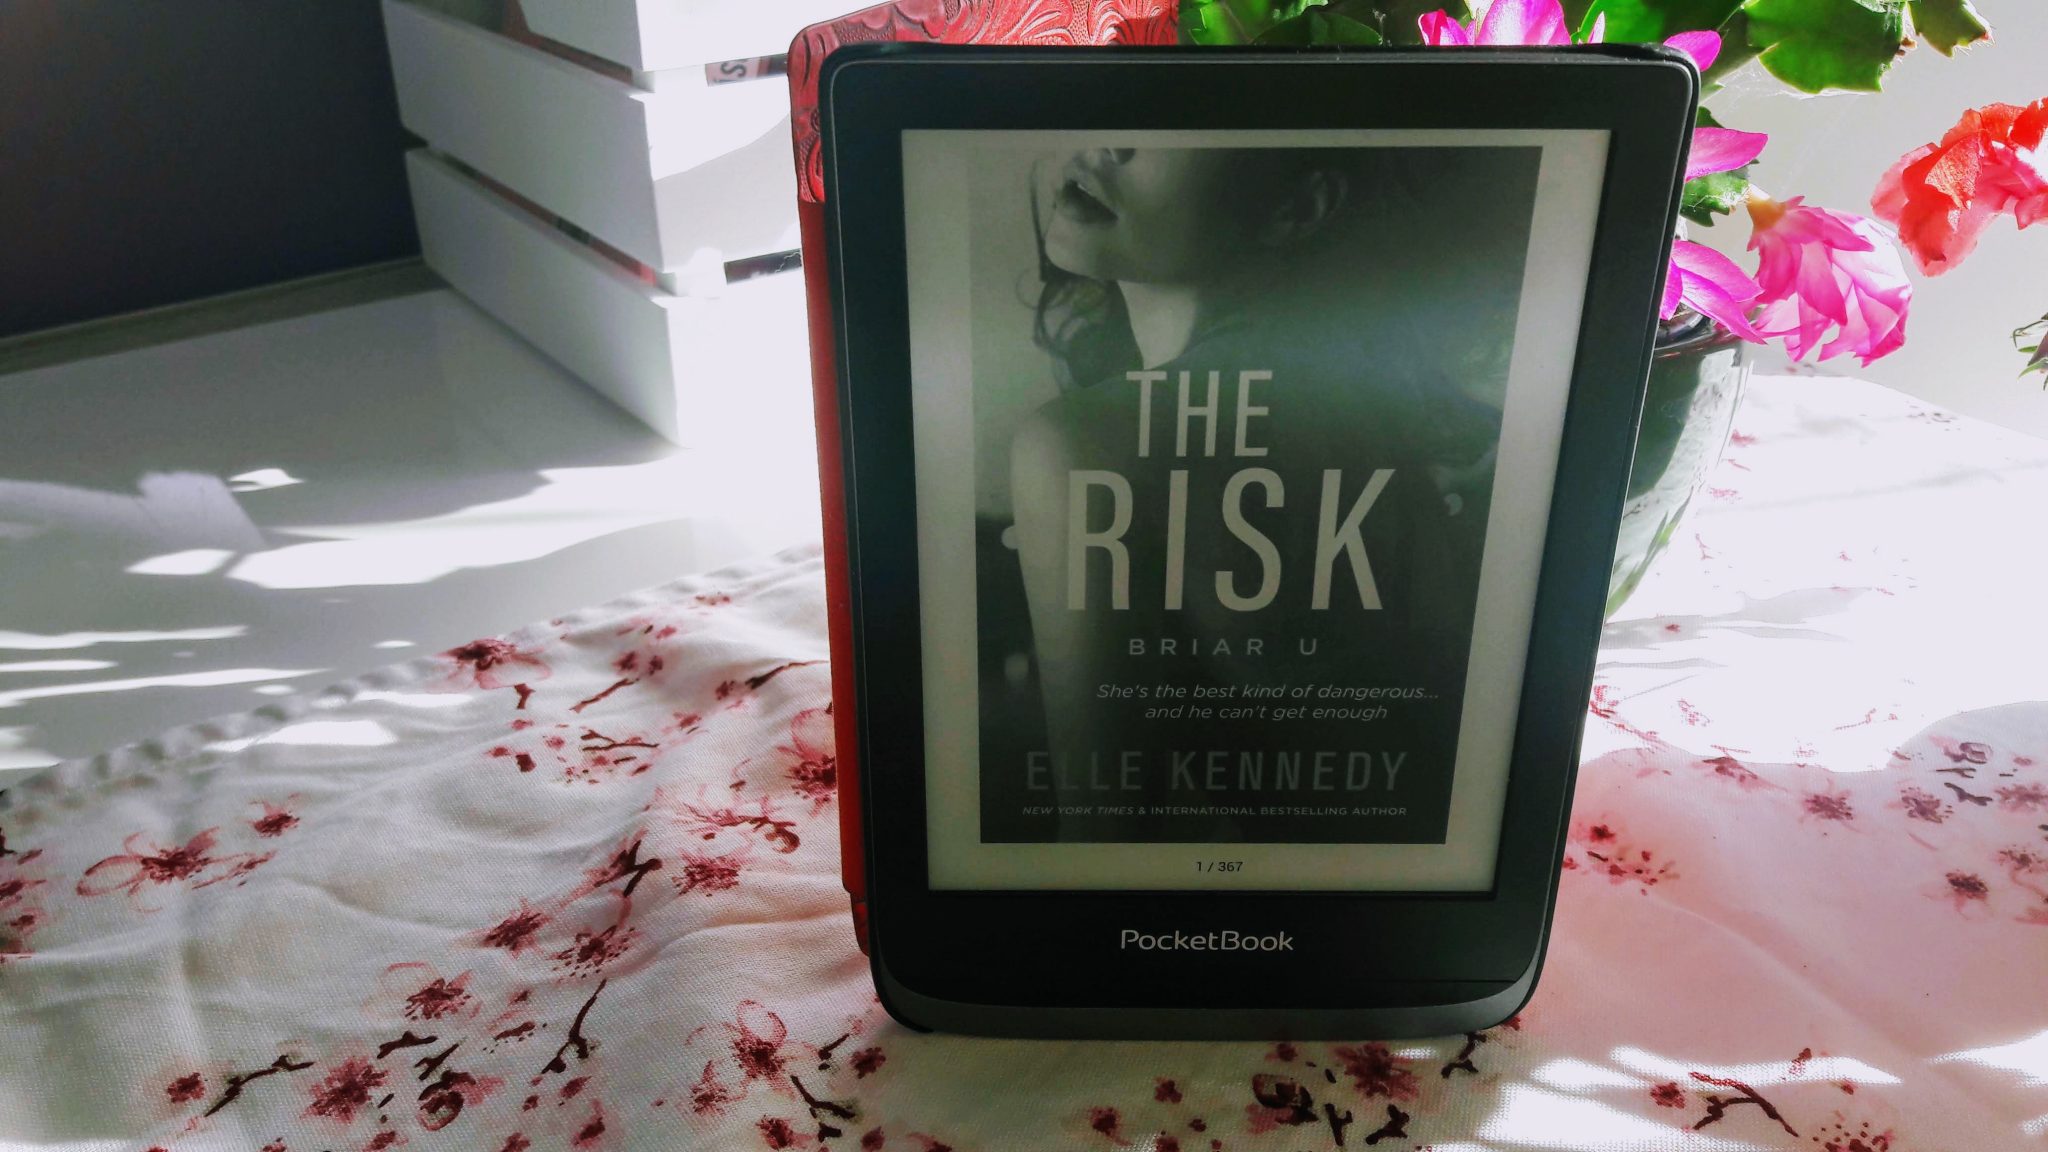 read the risk elle kennedy